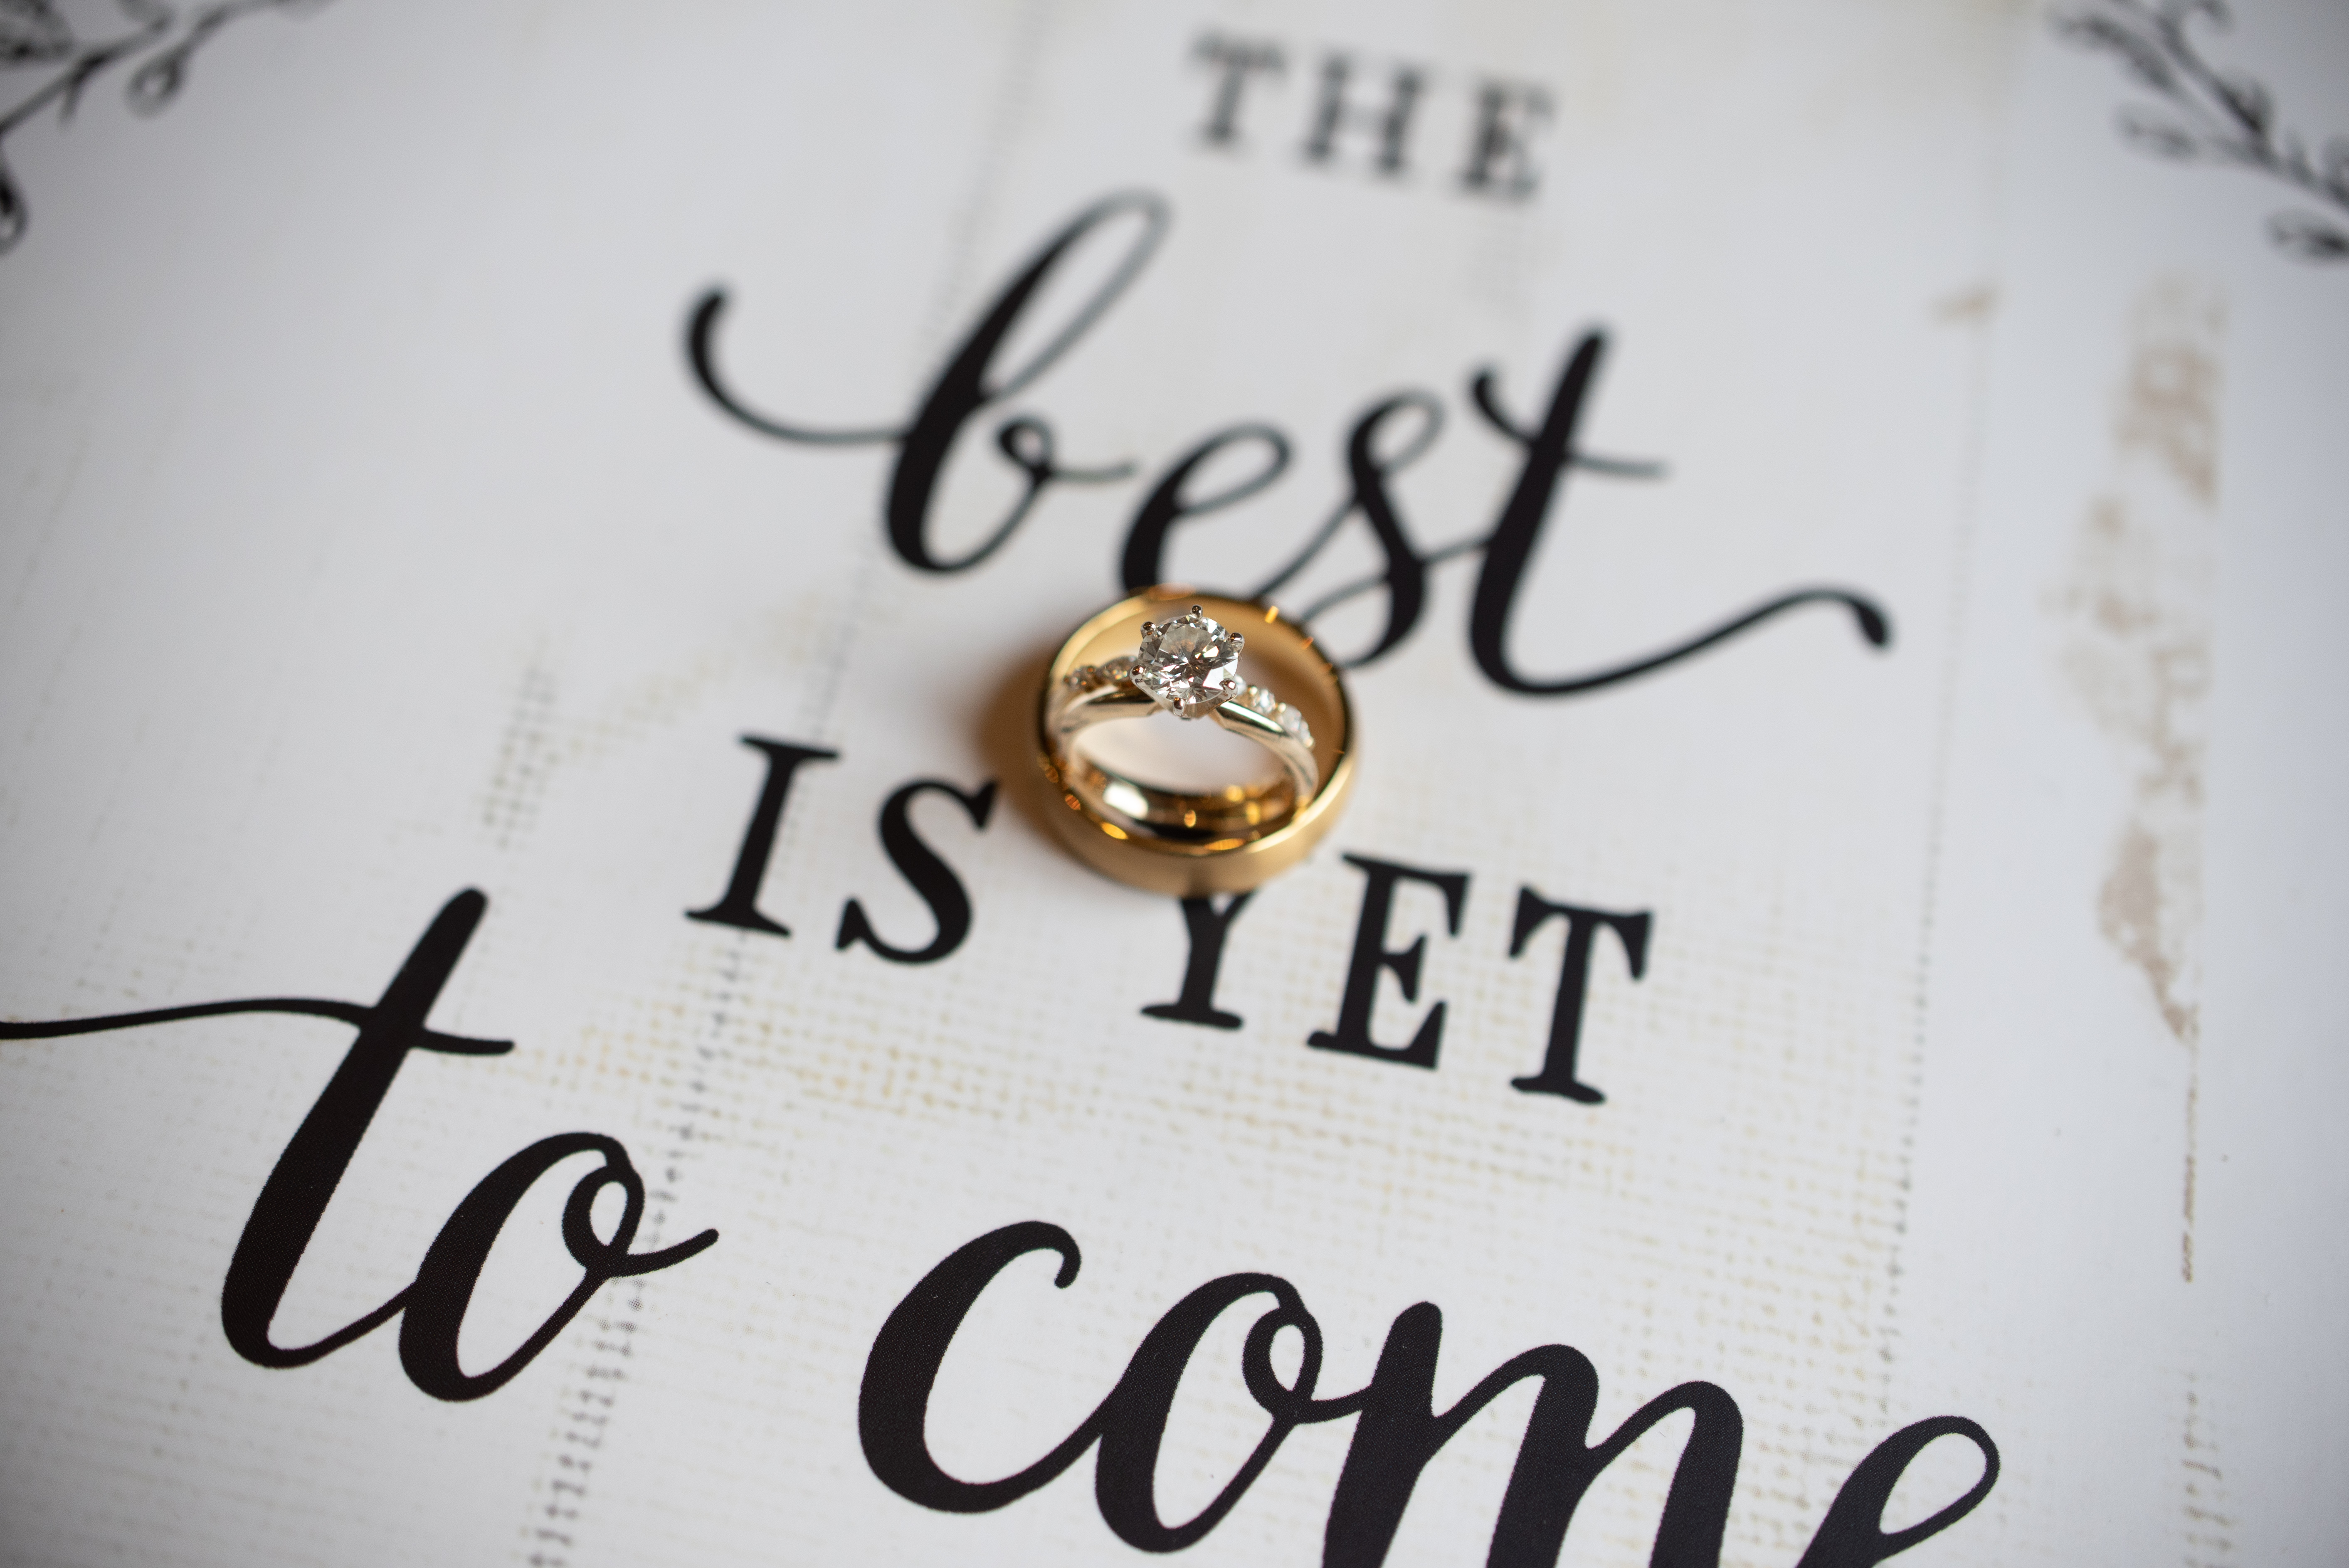 Wedding rings over text that reads "the Best is yet to come"